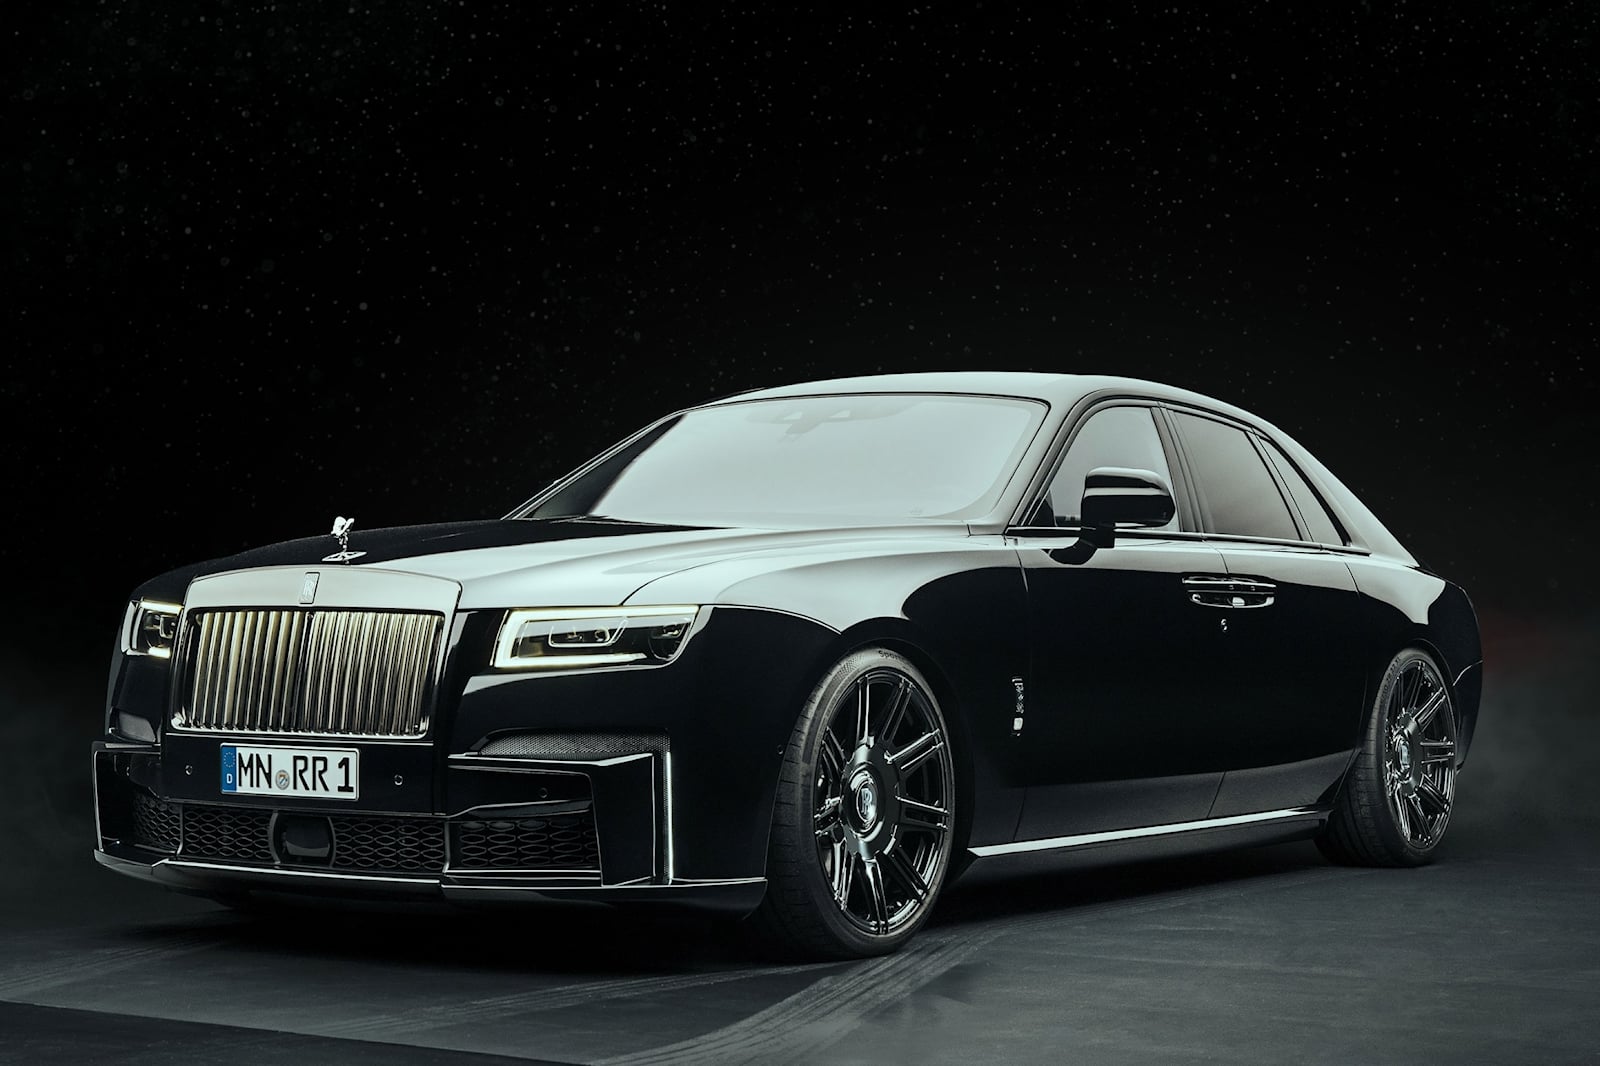 Sinister Rolls-Royce Black Badge Wraith Tuned To Over 700 HP